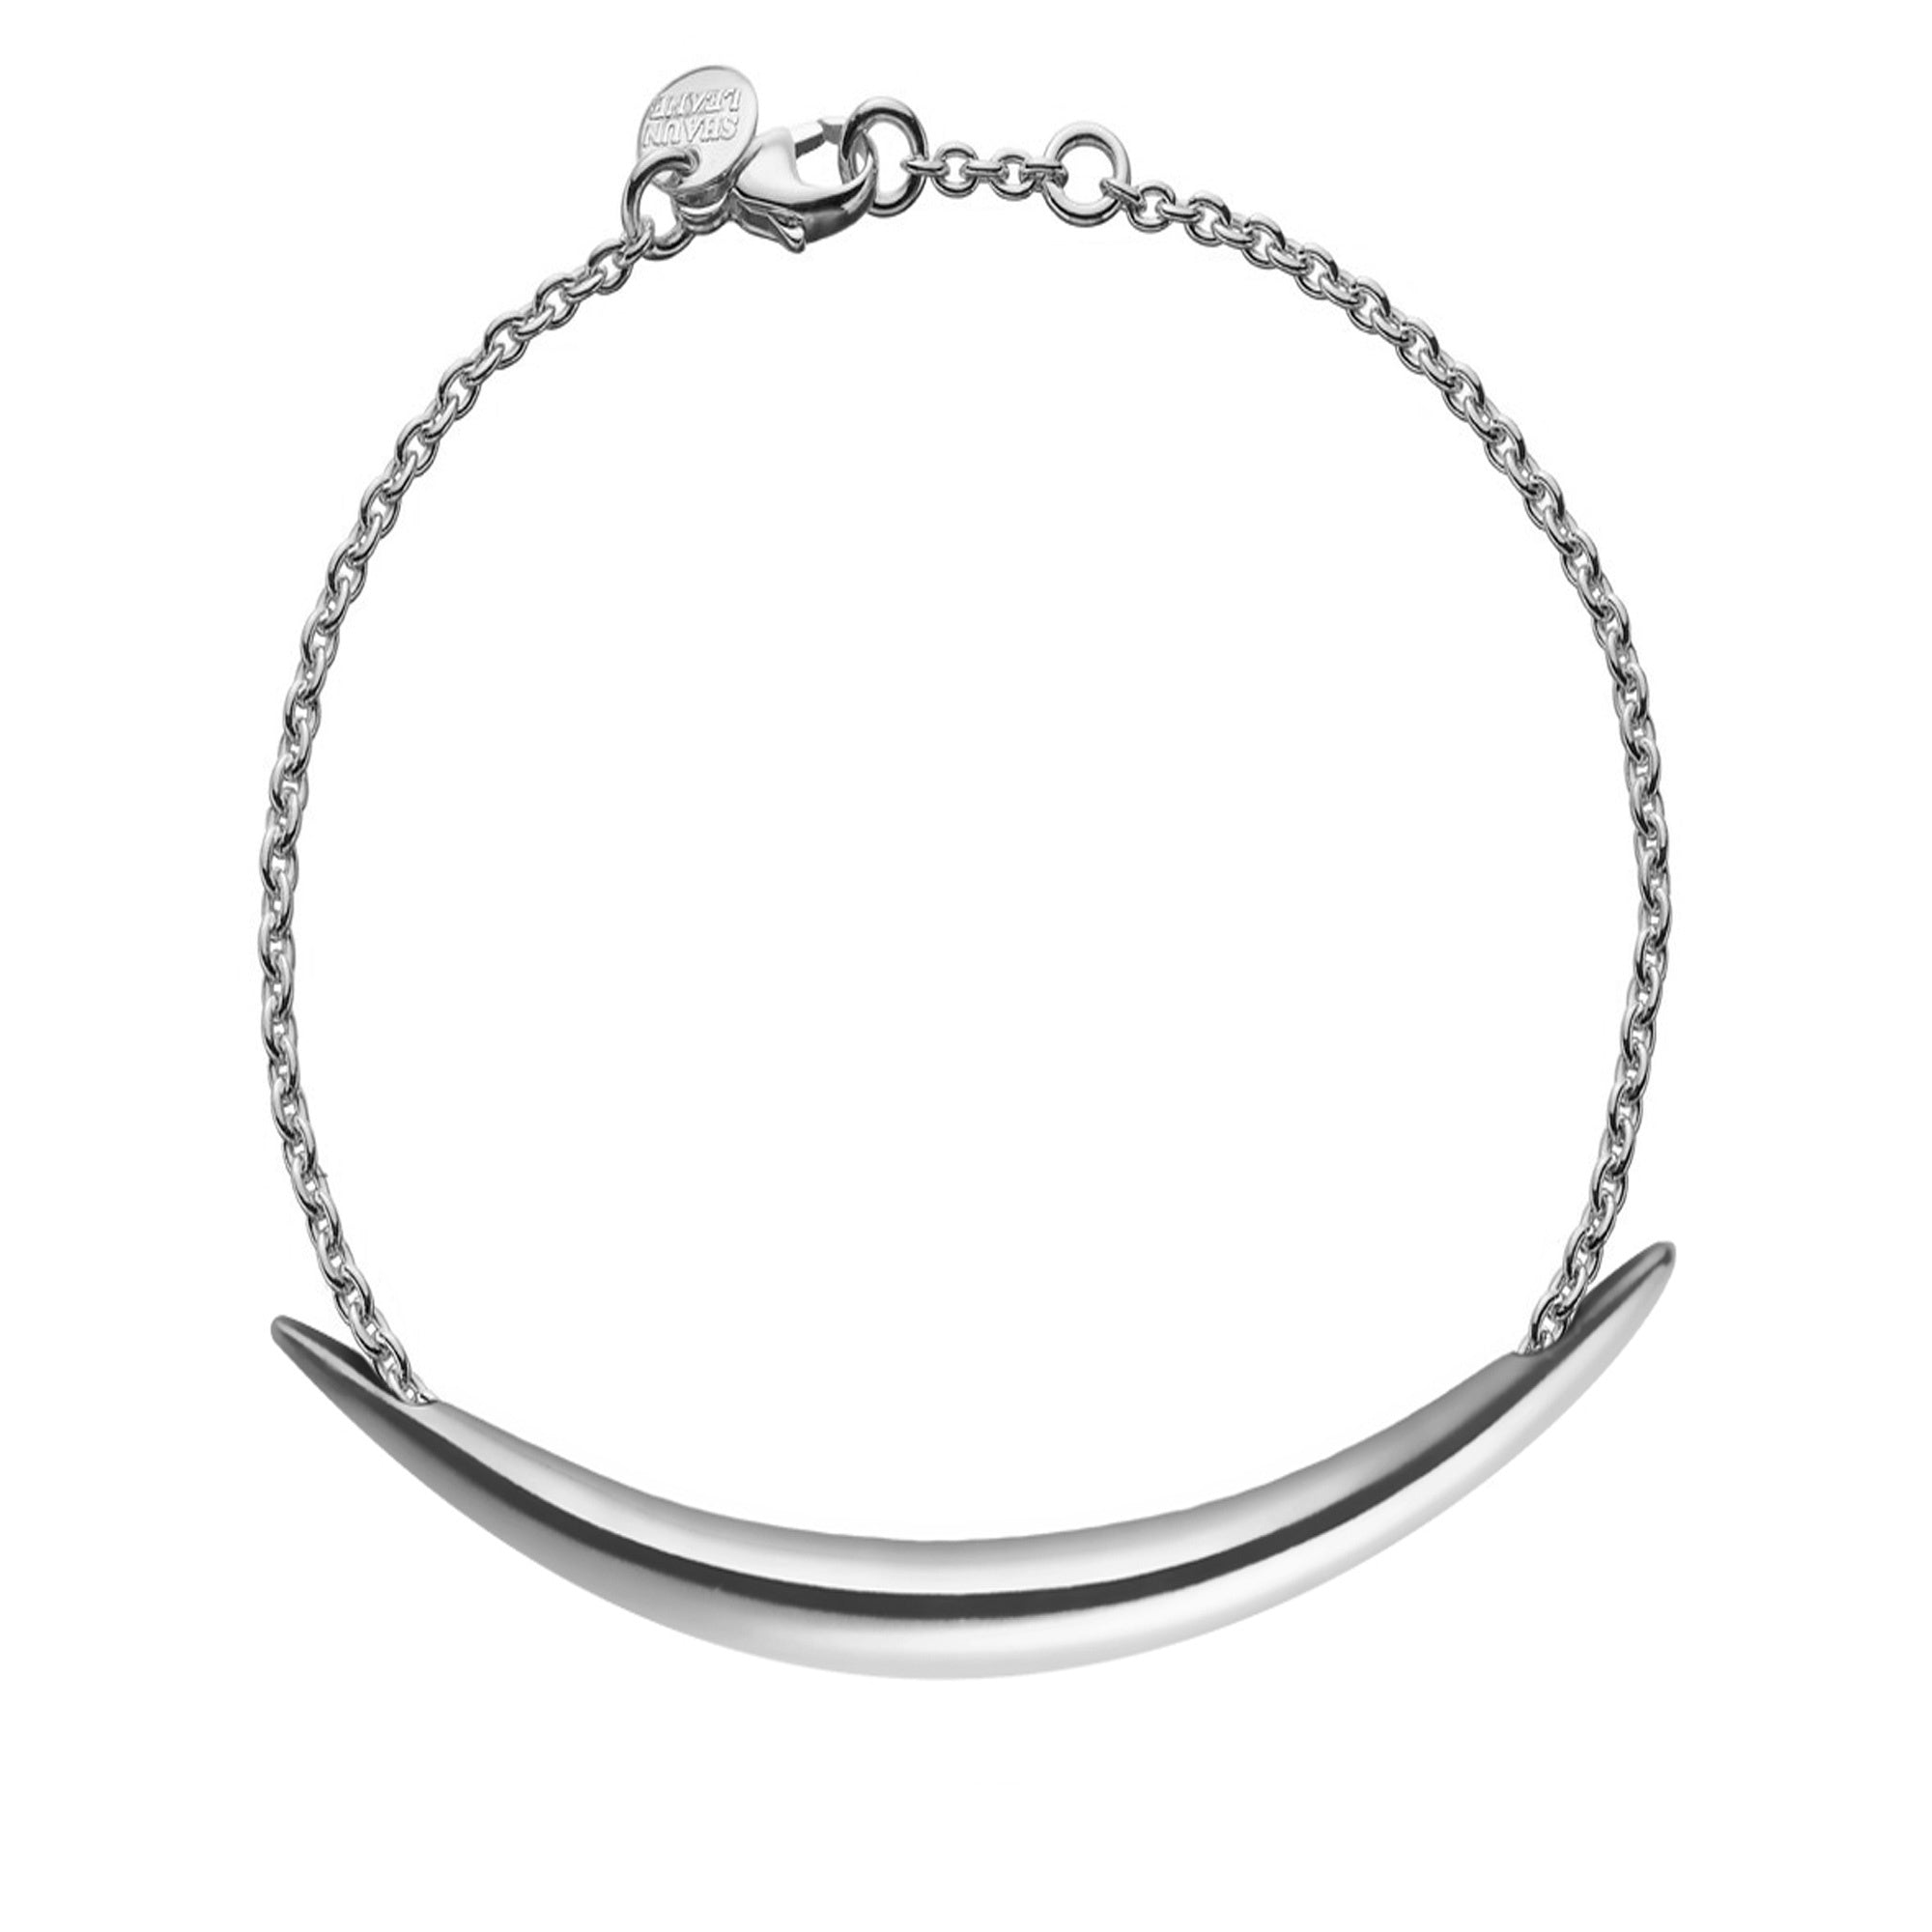 Silver Quill Bracelet | Shaun Leane – Yorkshire Jewellery Company